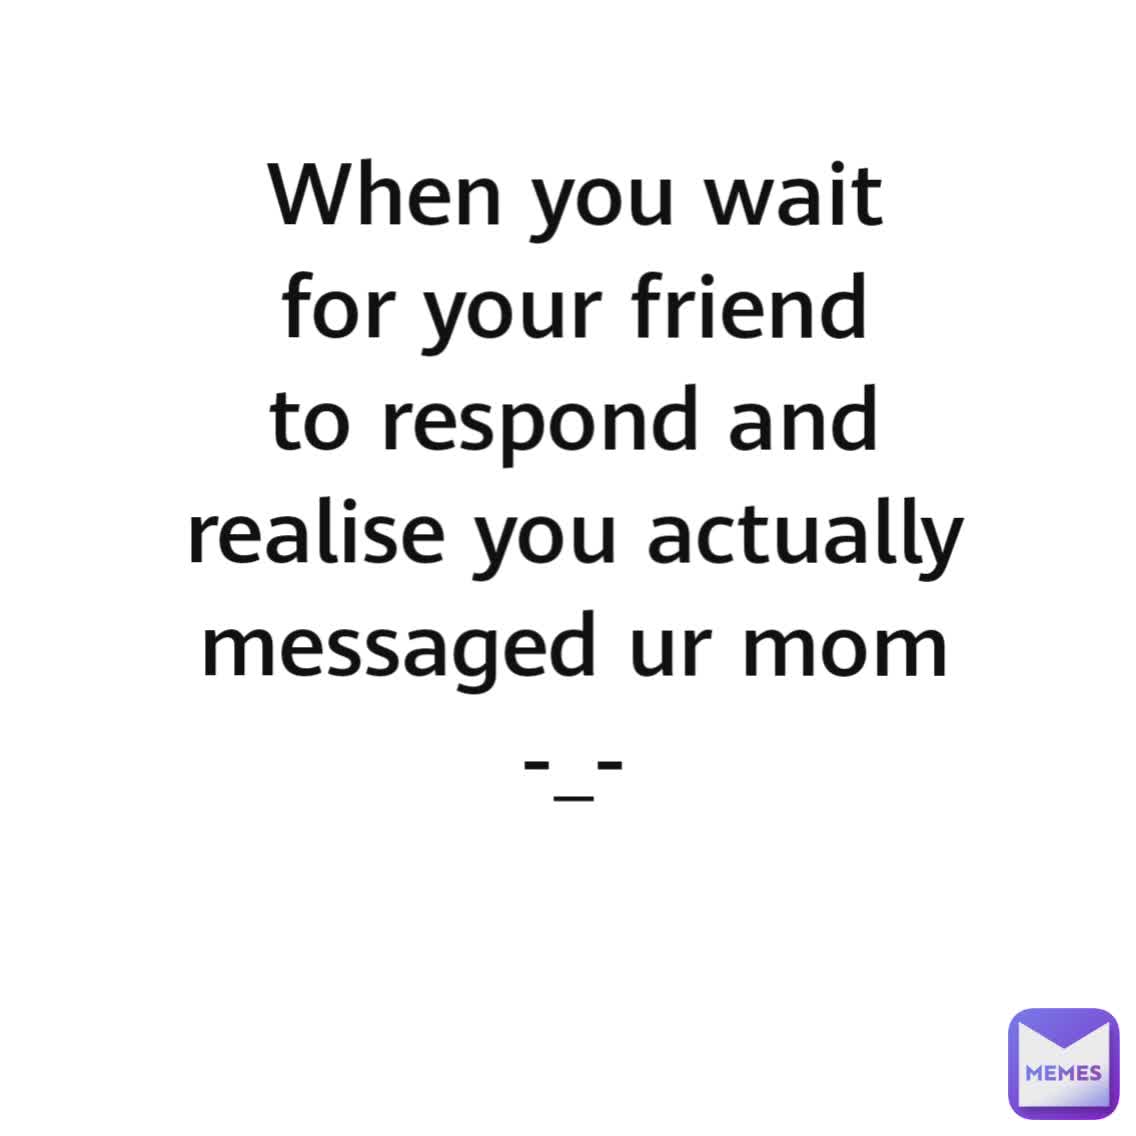 When you wait for your friend to respond and realise you actually messaged ur mom
-_-